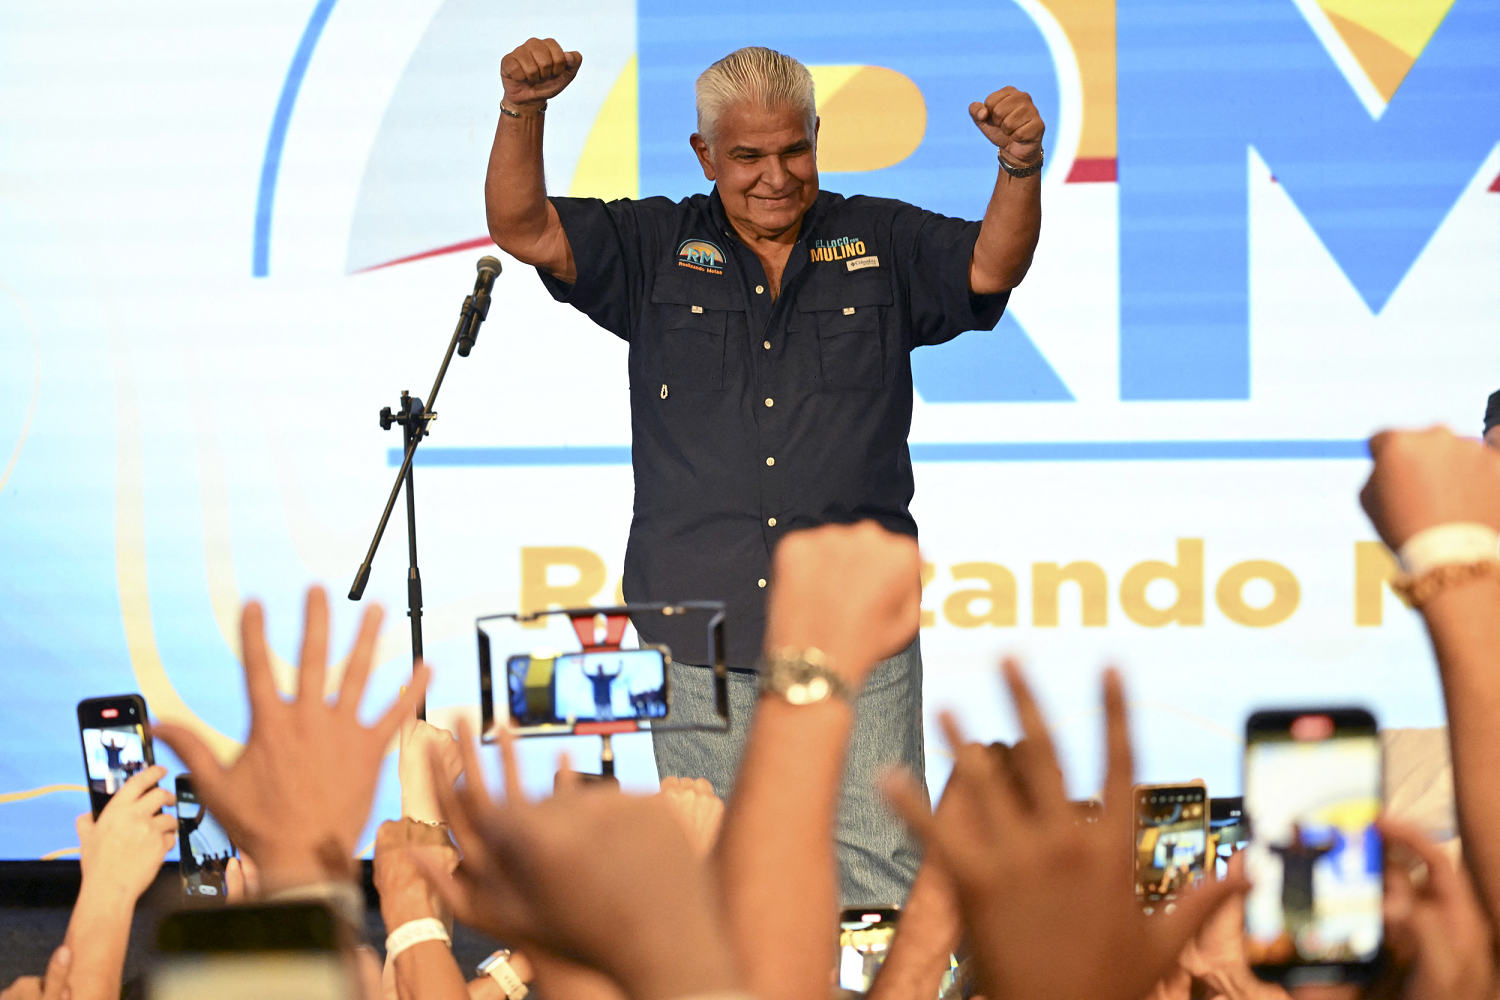 Panama's new president-elect was practically retired: 'I never imagined this'